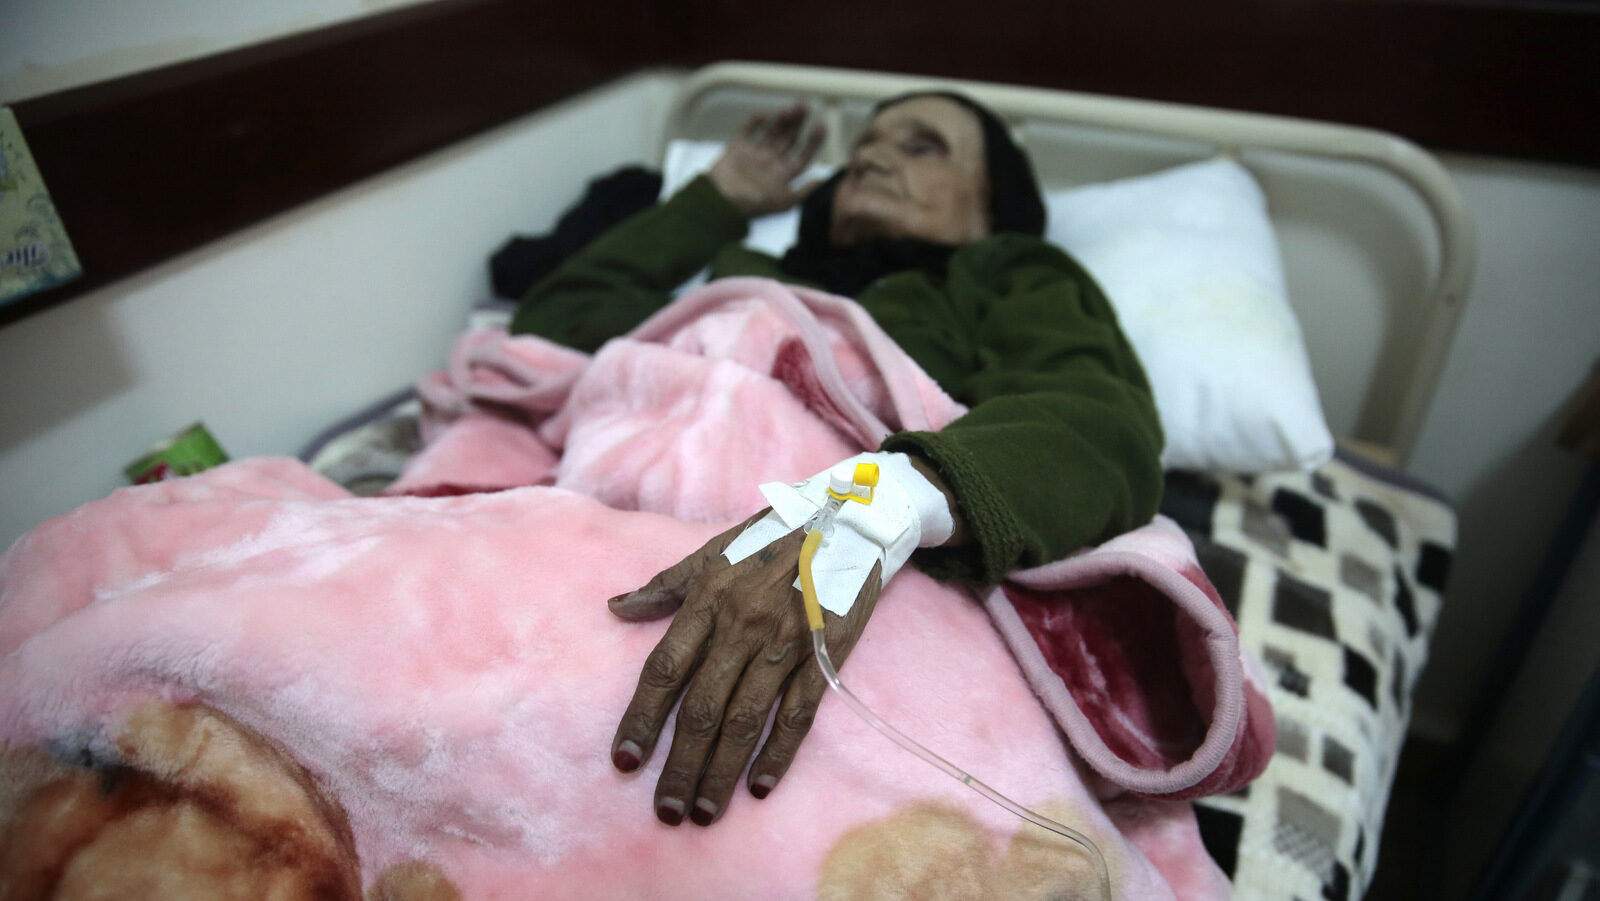 An elderly woman is treated for suspected cholera infection at a hospital in Sanaa, Yemen, May. 15, 2017. The U.N. humanitarian coordinator in Yemen says a cholera outbreak has killed 115 people over the past two weeks. (AP Photo/Hani Mohammed)